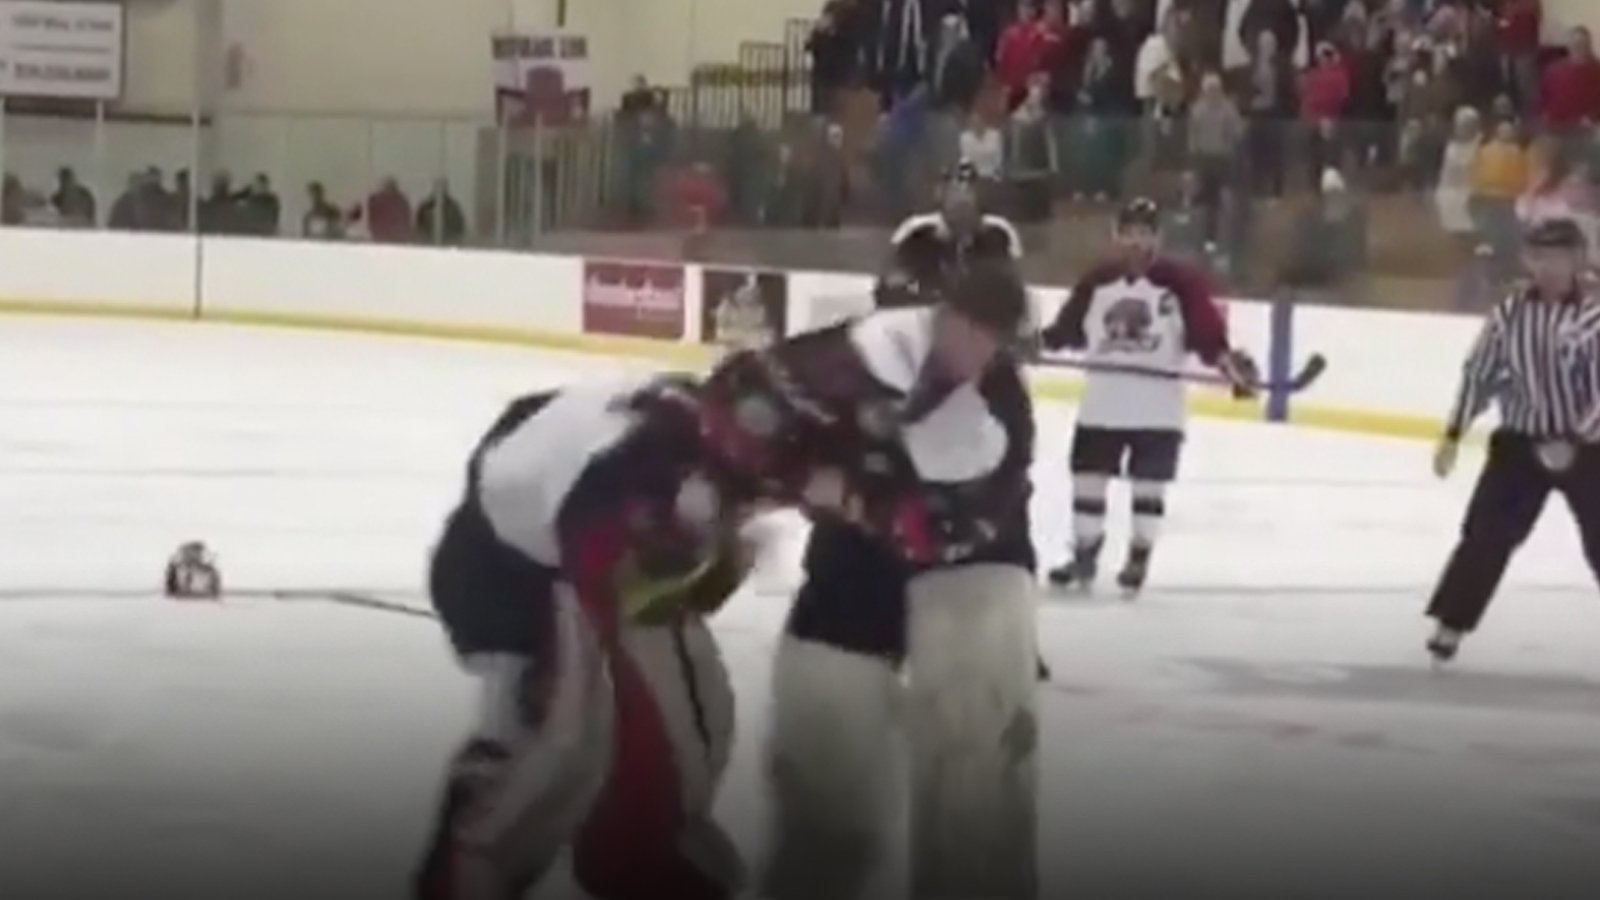 Must see: Crazy goalie fight, massive punches thrown!